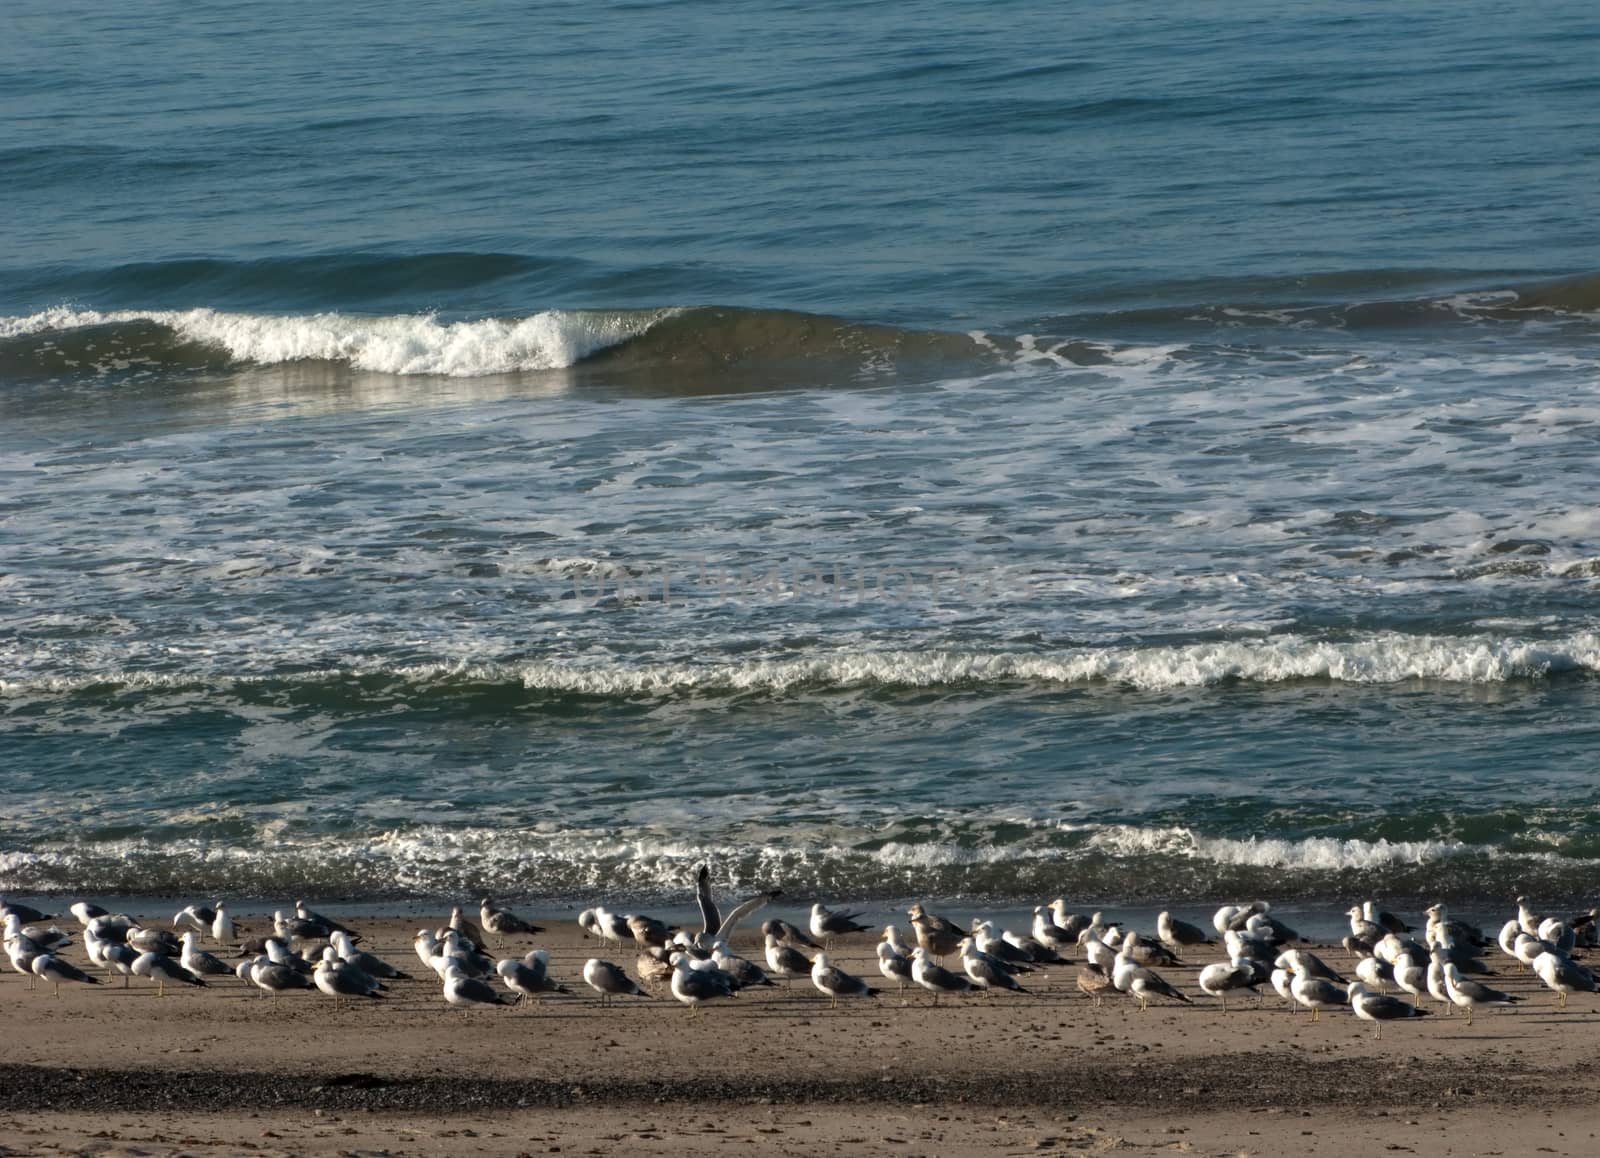 Pacific ocean surf and the seagulls on the coastline sand